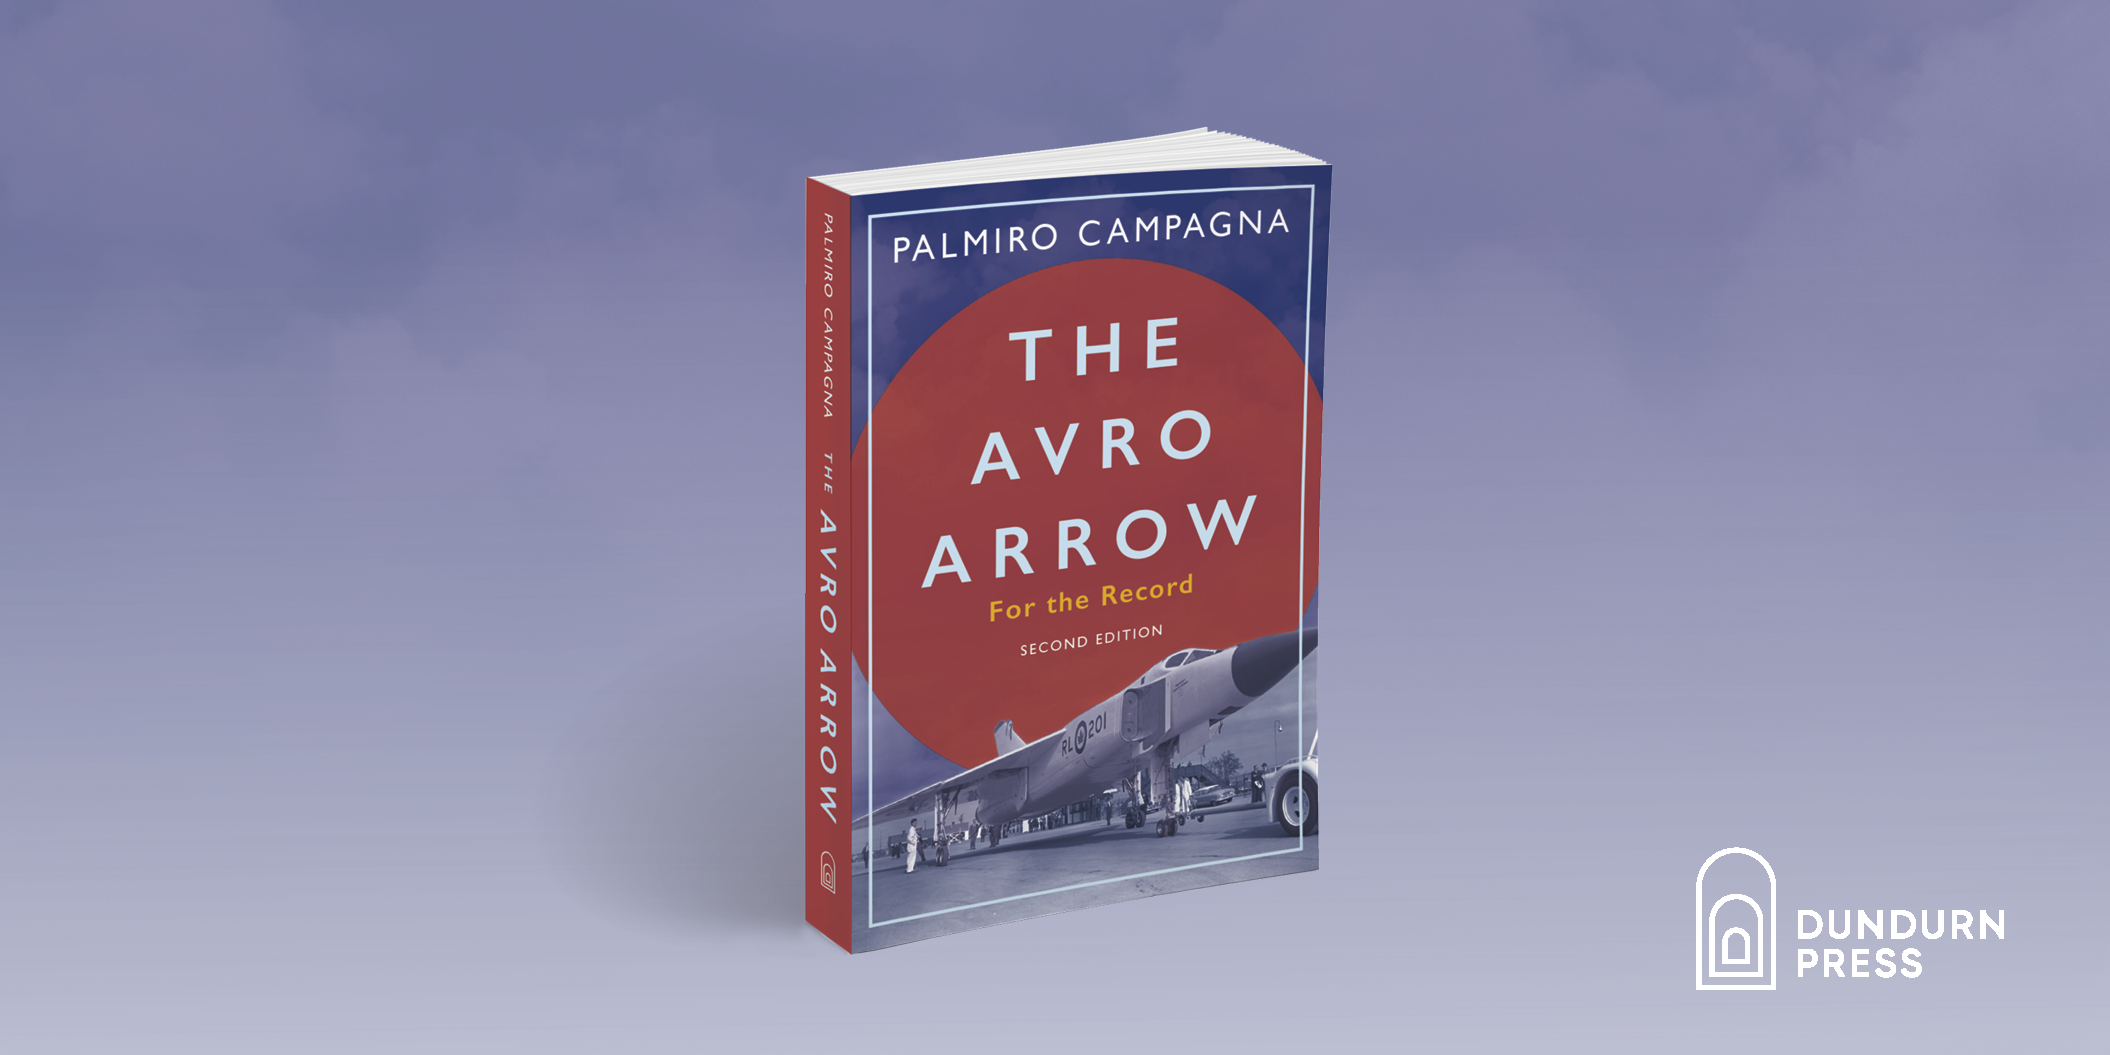 The Avro Arrow Book Launch at Perfect Books - Dundurn